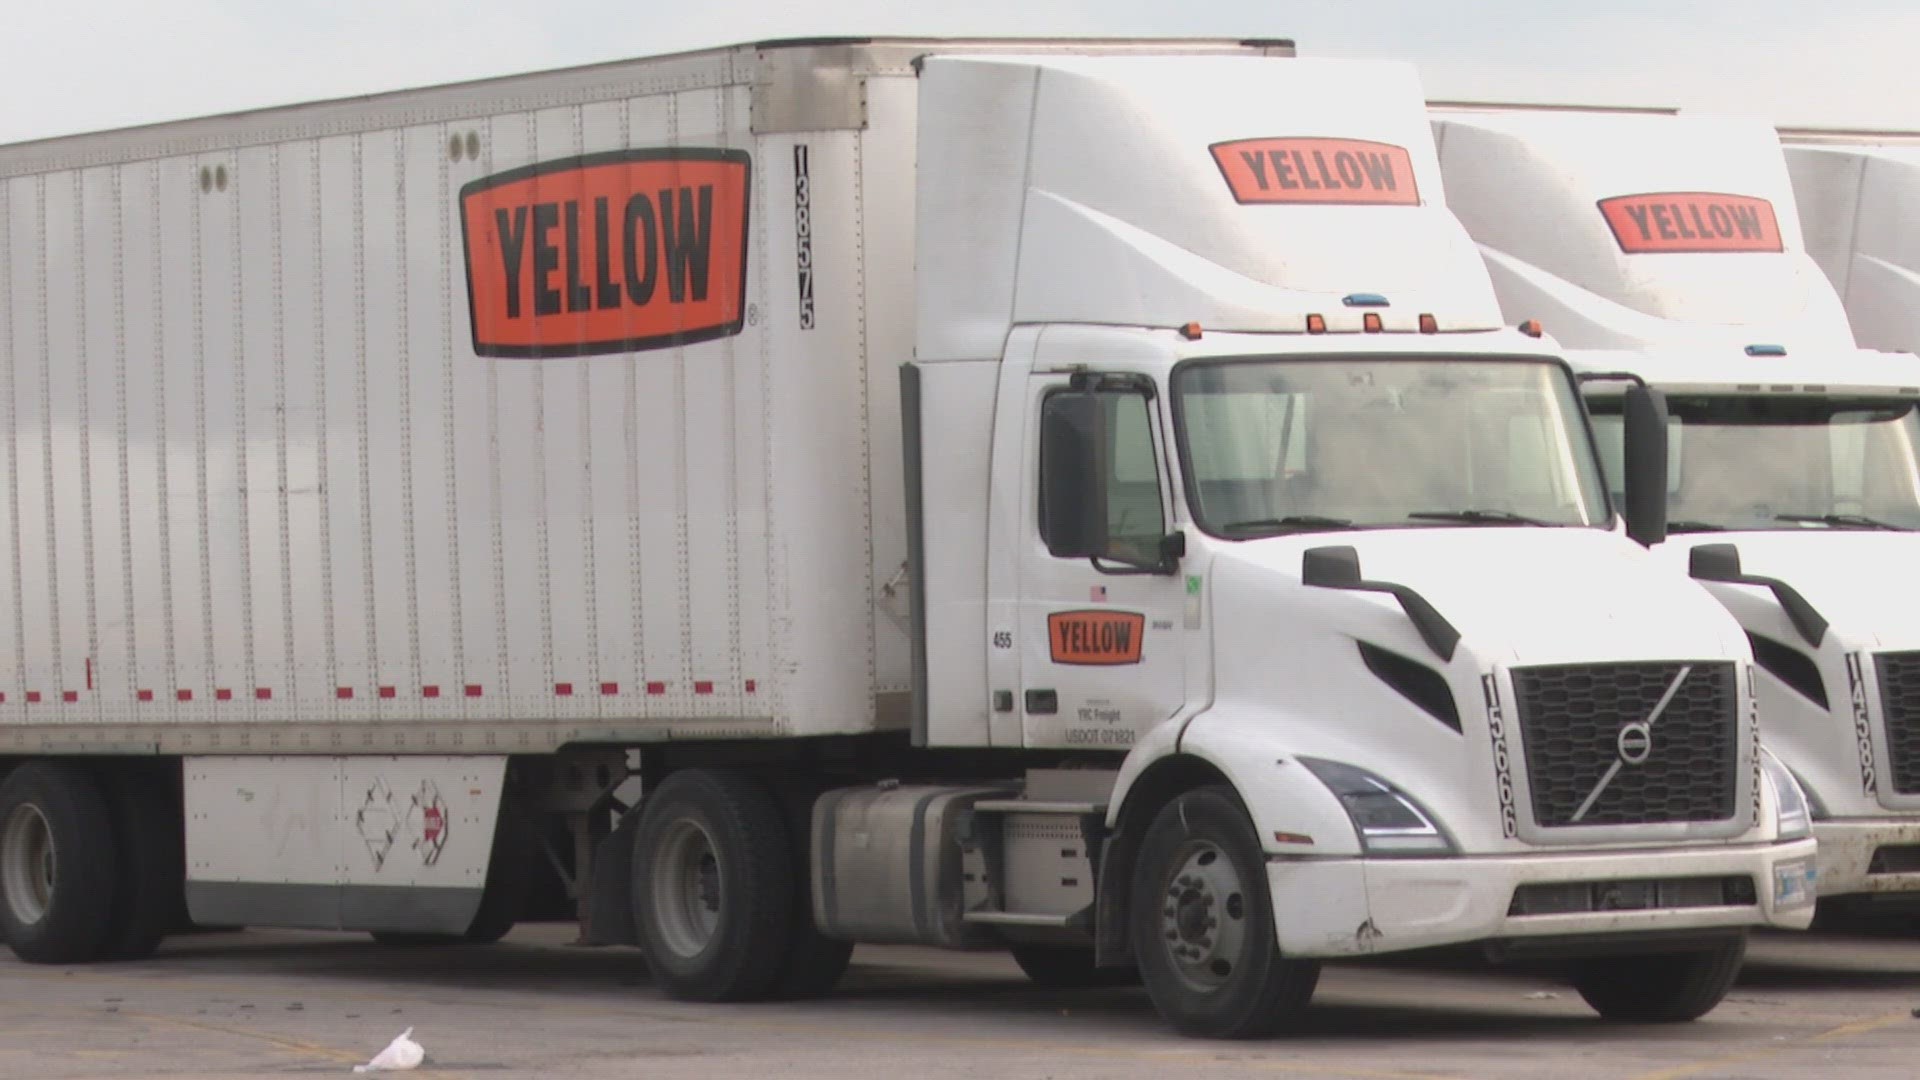 Thousands of truck drivers and dock workers will not walk off their jobs and join a picket line Monday. Yellow Freight reached a deal to avert a strike.